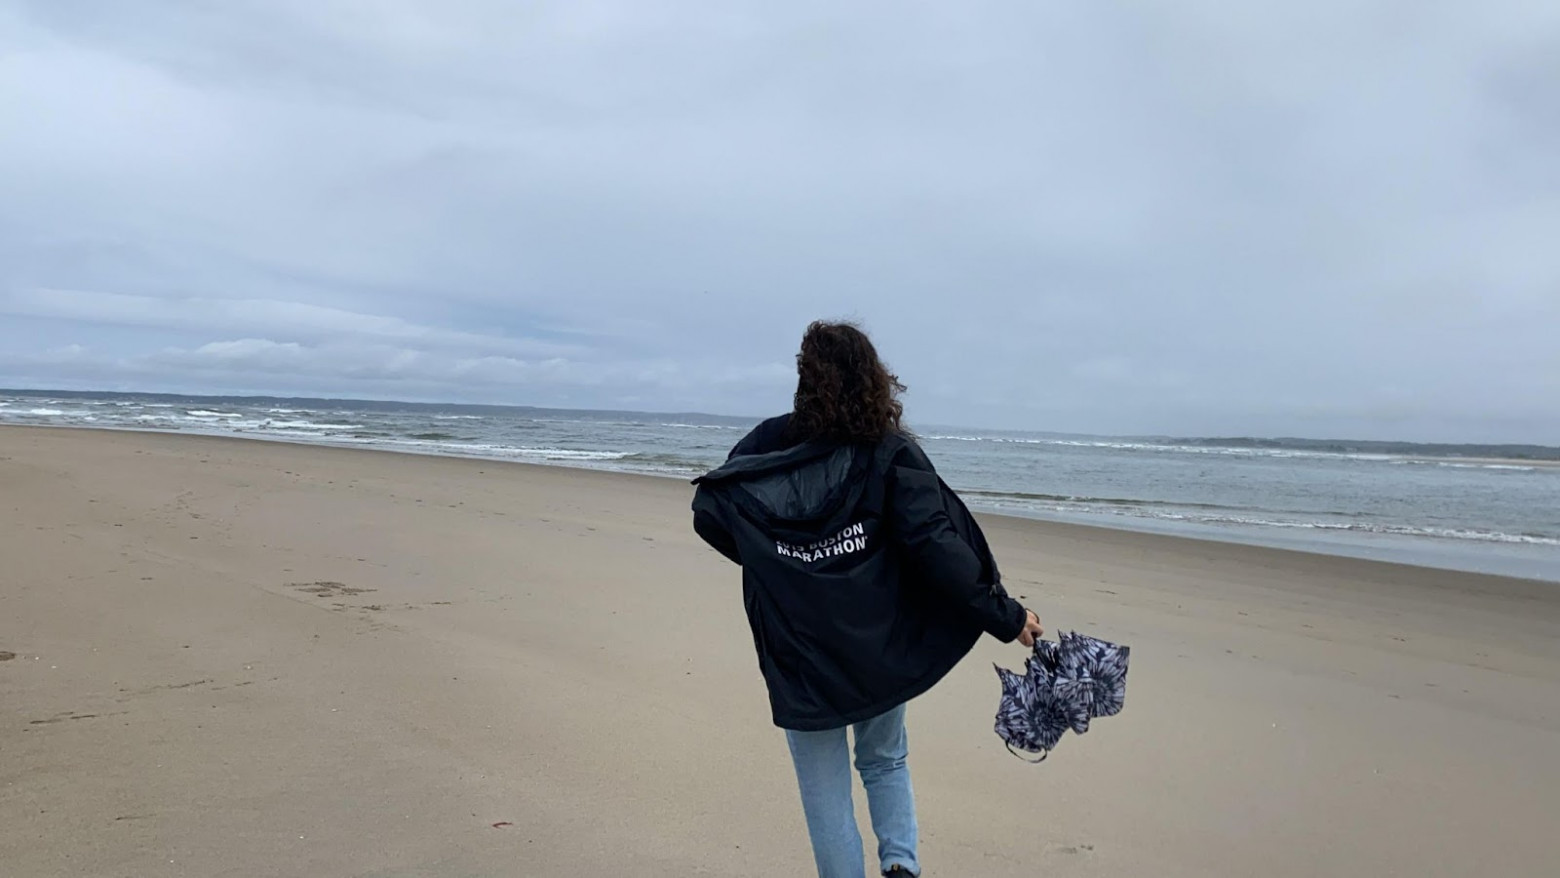 A woman, seen from the back, is wearing light blue jeans and a black jacket carries a closed umbrella and is being blown back by the wind. She walks along a coastline's hard-packed sand on a cloudy, grey day.